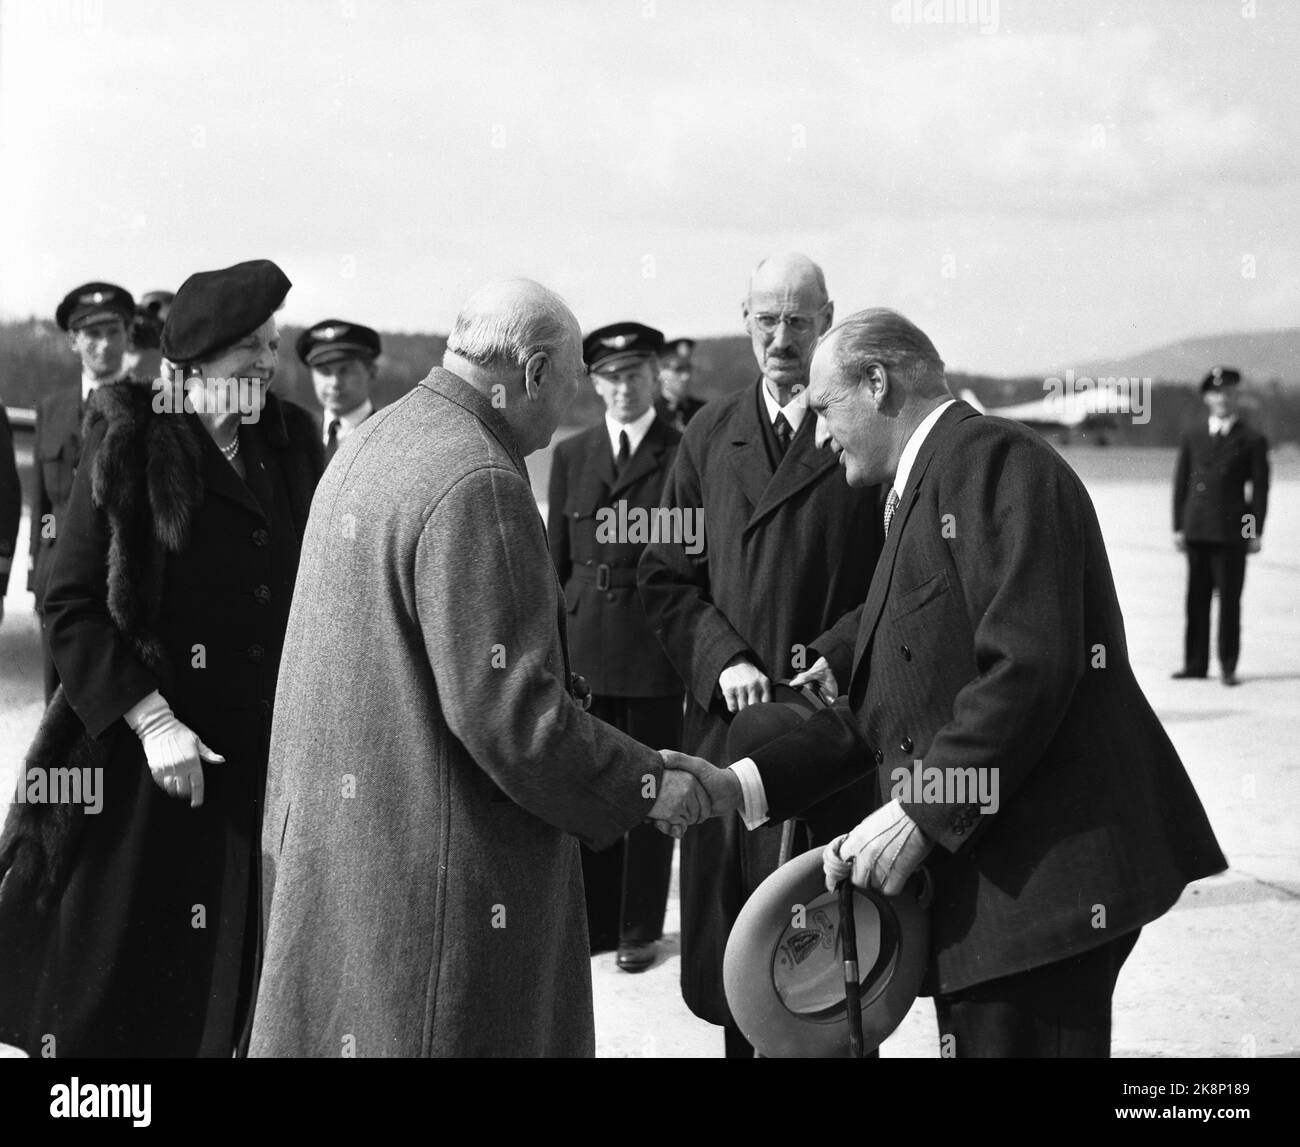 Fornebu 19480512. Prime Minister of the UK Winston Churchill visits Norway with his wife (behind t.v.). At Fornebu Airport they were welcomed by King Haakon (middle) and Crown Prince Olav (t.h.). Photo: NTB Stock Photo